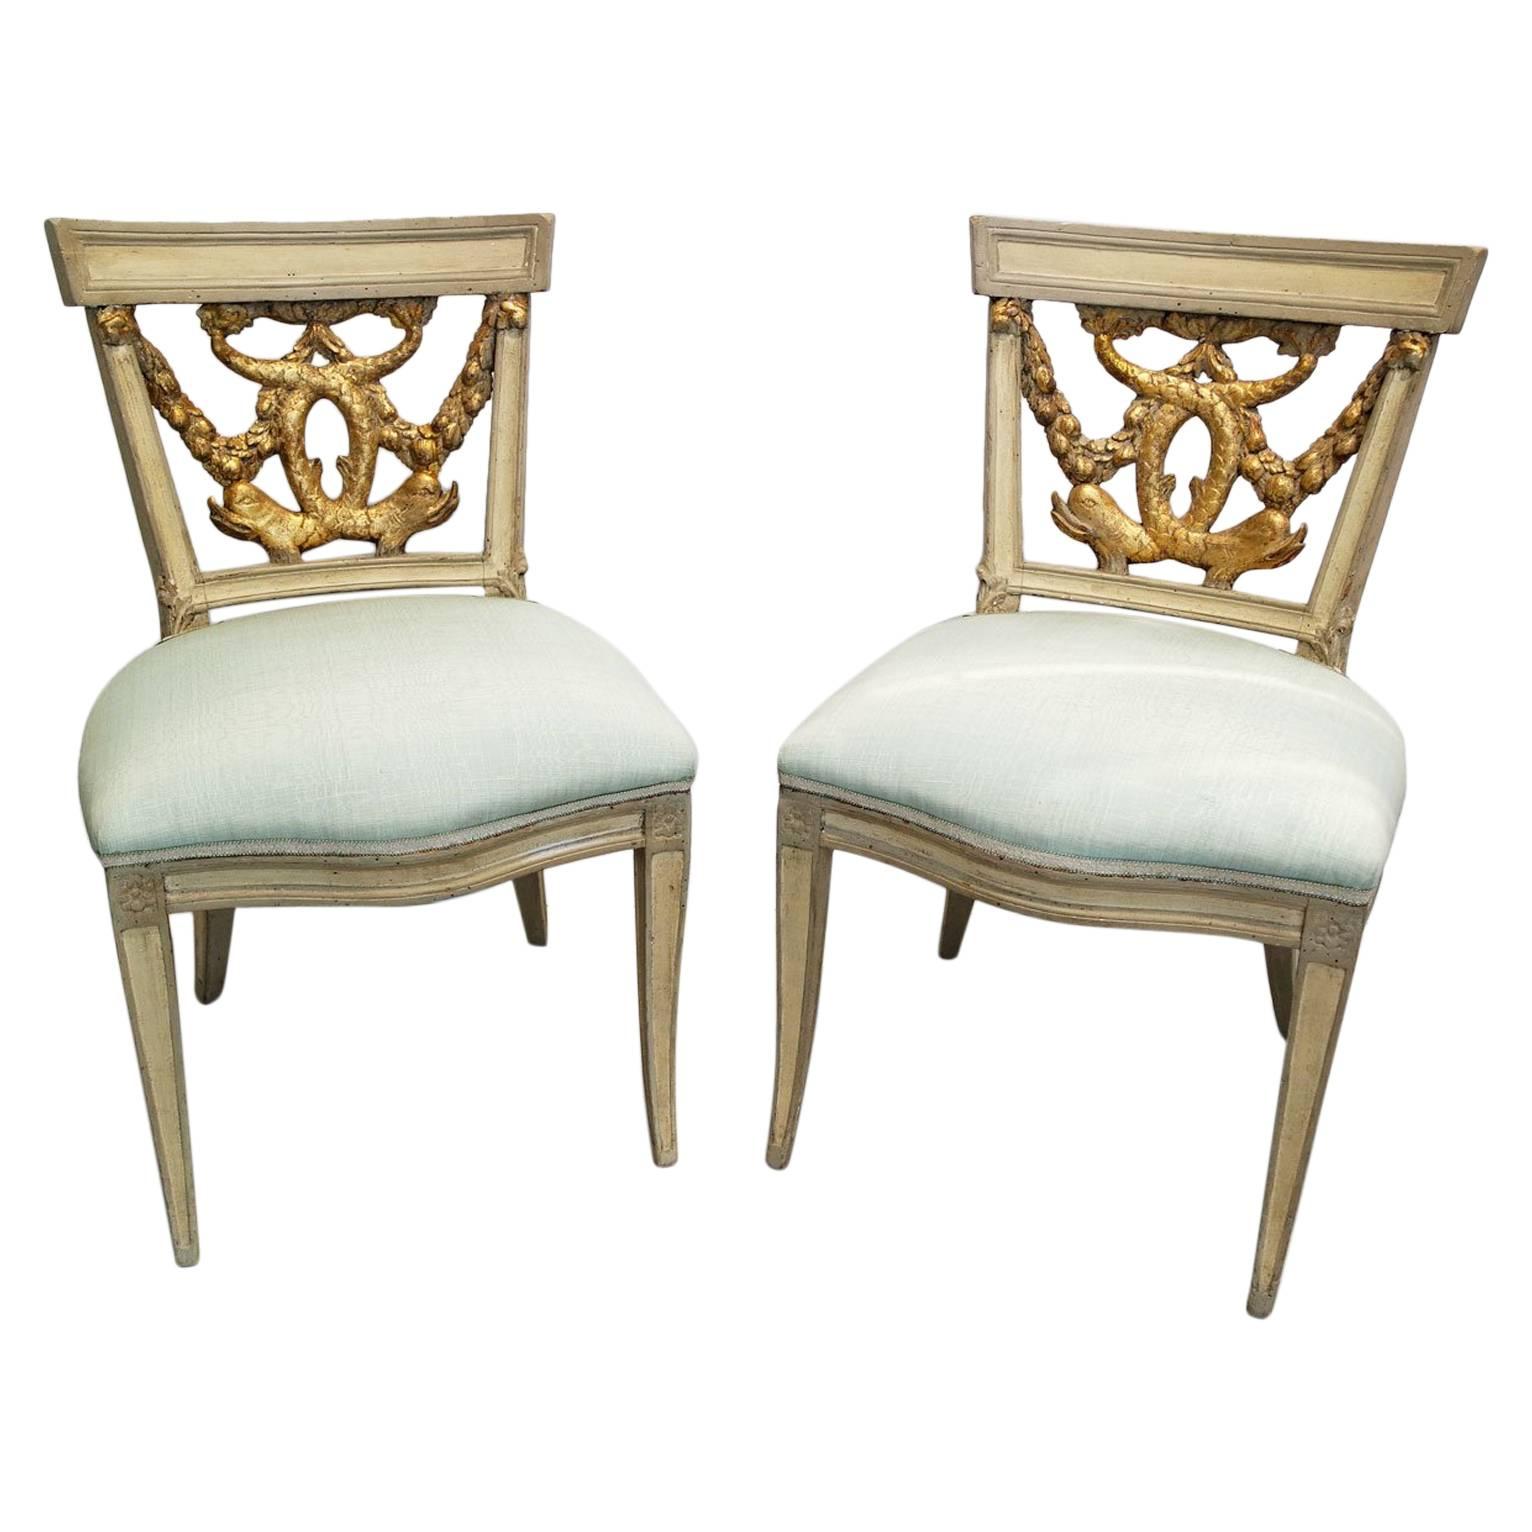 Pair of Italian Neoclassical Painted and Partial Gilt Side Chairs